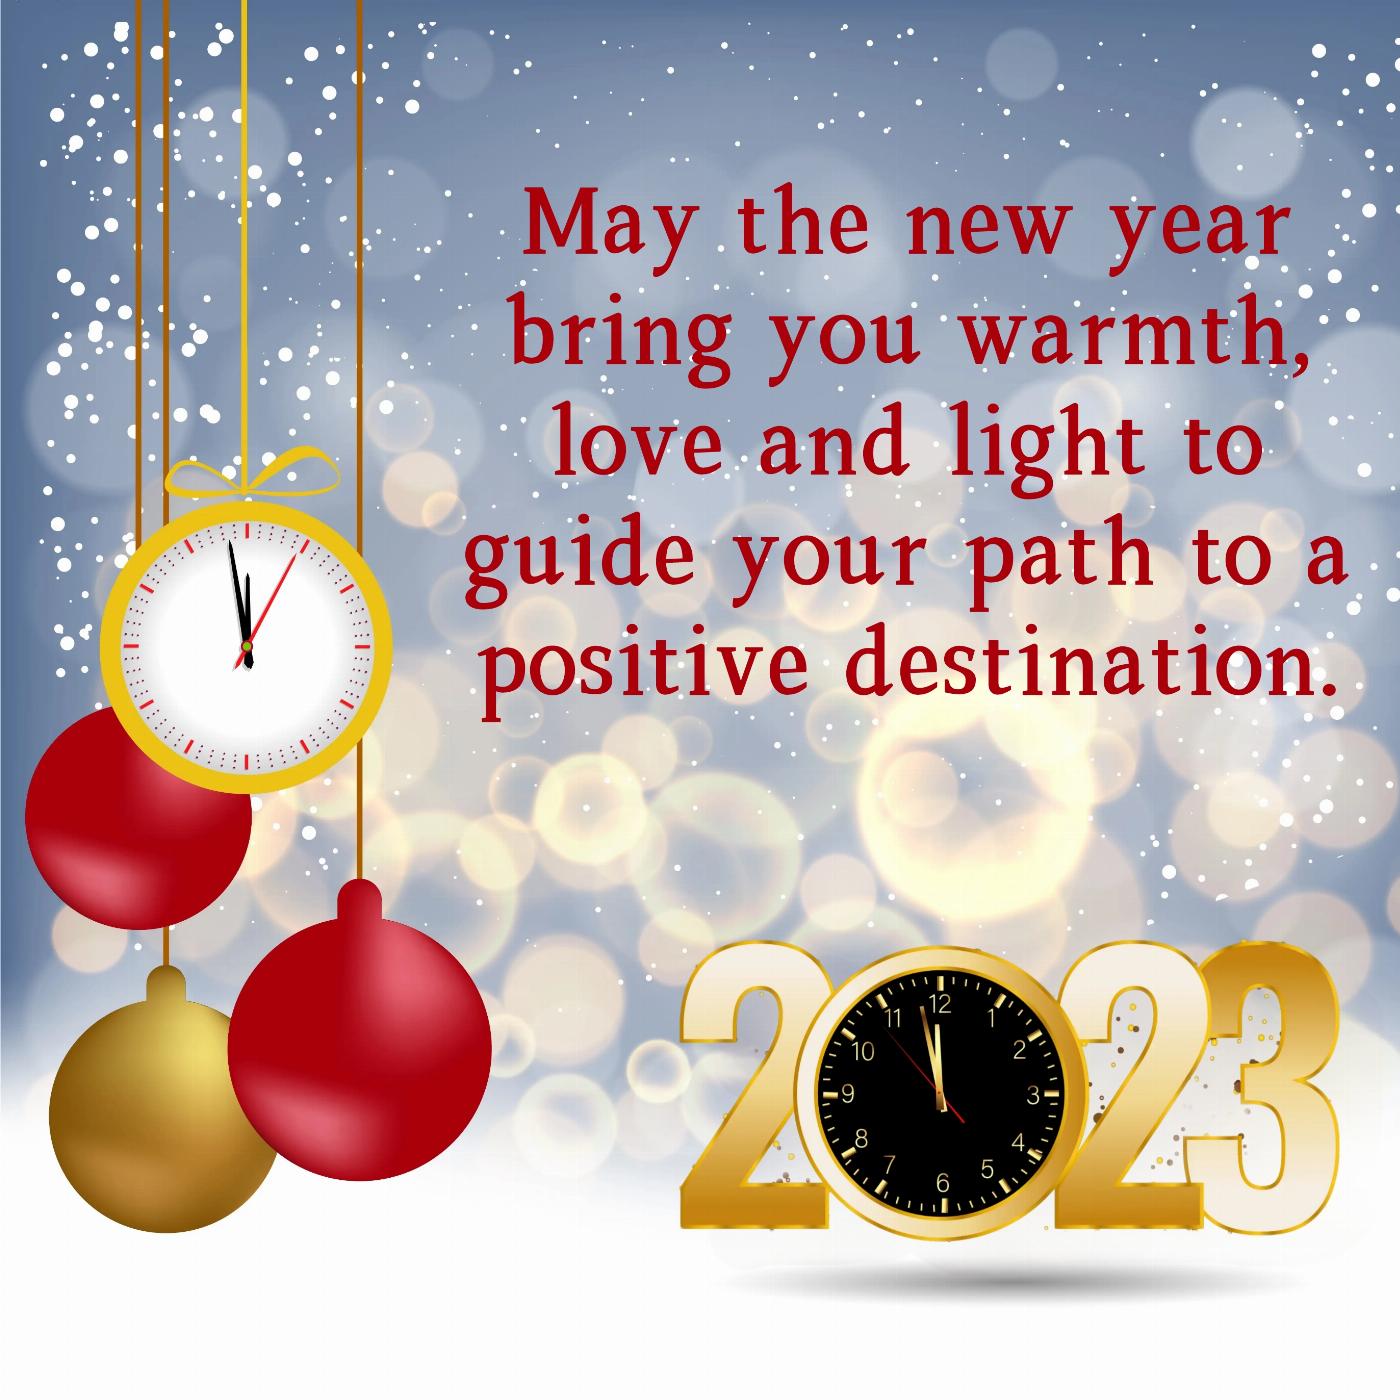 May the new year bring you warmth love and light